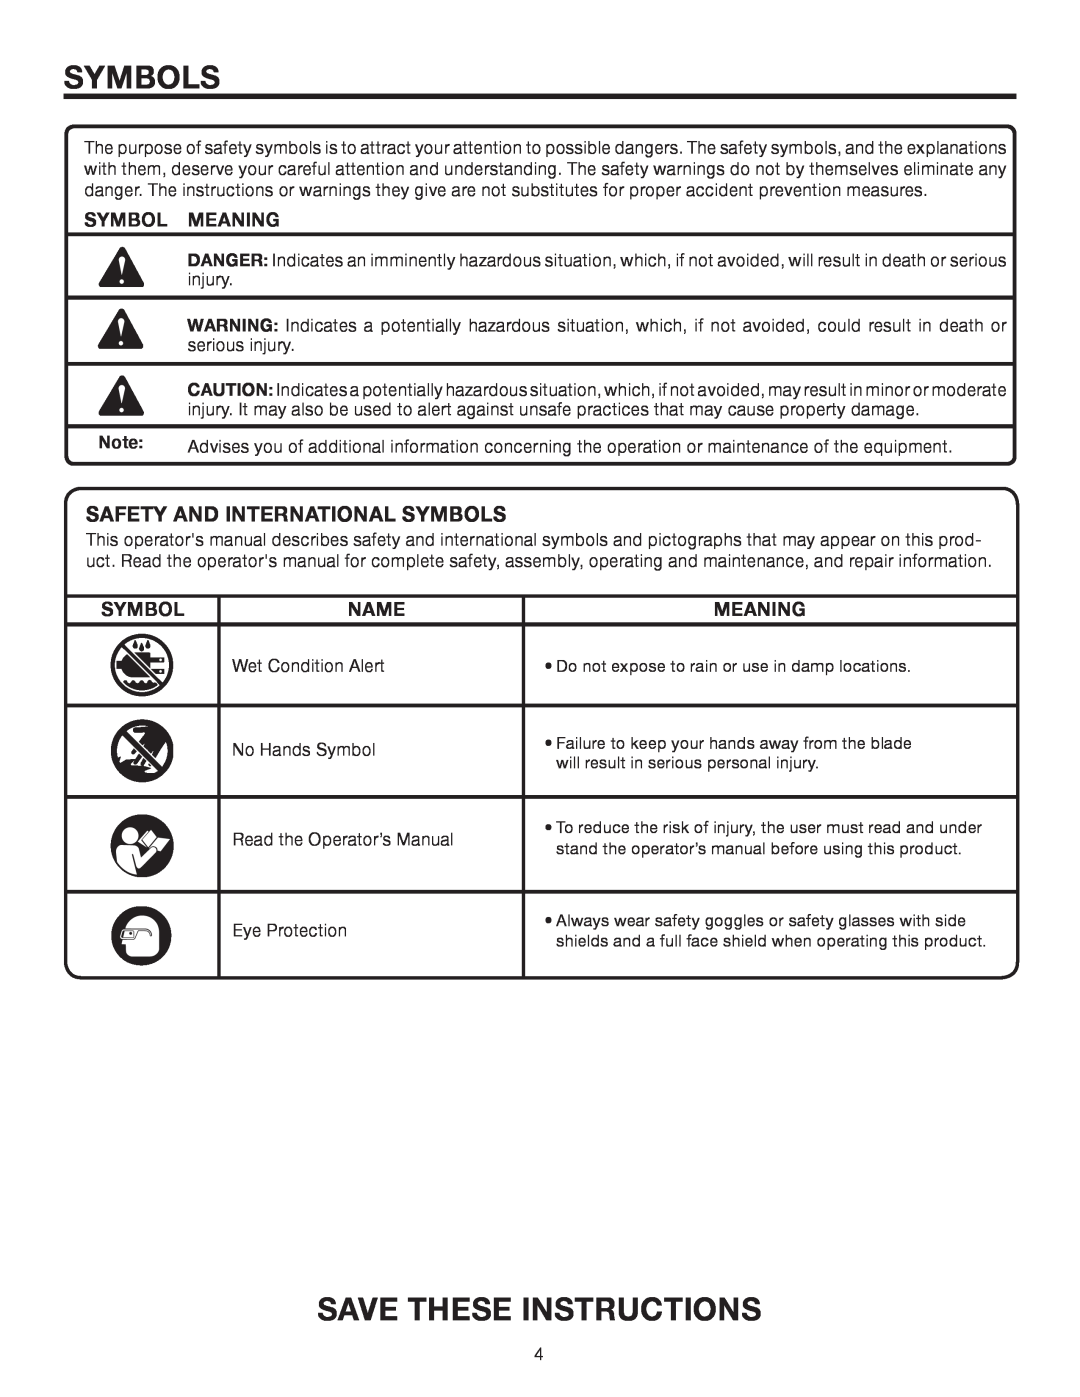 RIDGID AC99402 manual Save These Instructions, Safety And International Symbols, Symbol Meaning, Name 